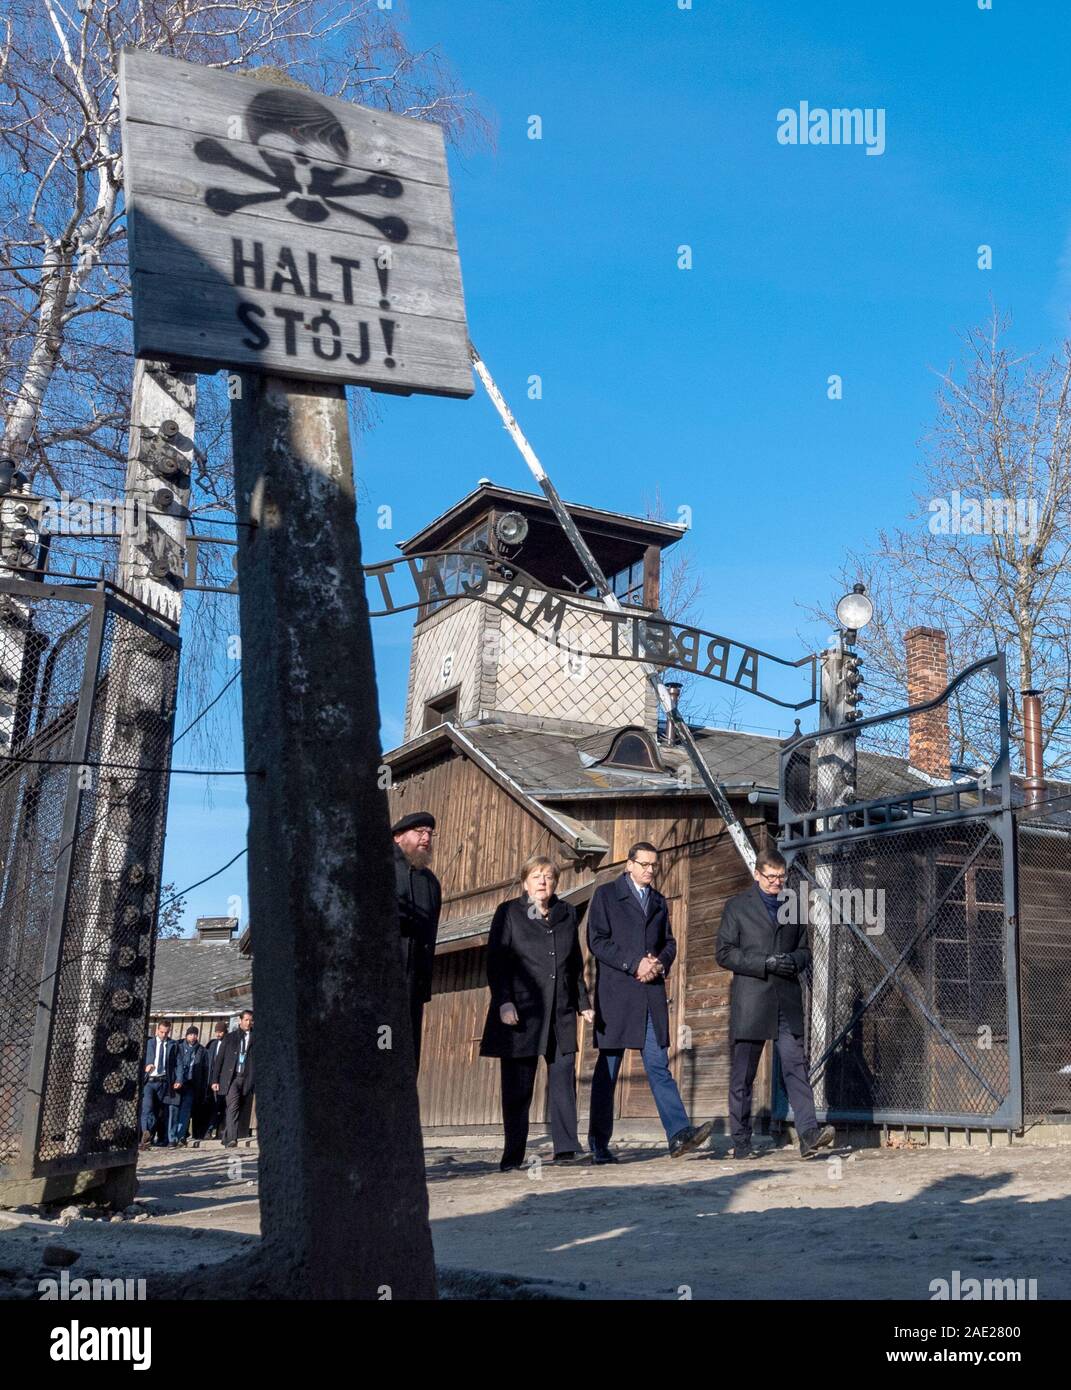 06 December 2019, Poland, Oswiecim: Federal Chancellor Angela Merkel (CDU) visits the former German Auschwitz concentration camp and walks under the entrance gate with the words 'Arbeit macht frei' (Work makes free) together with Polish Prime Minister Mateusz Morawiecki (to the right of Merkel) and Piotr Cywinski (to the left of Merkel), Director of the Auschwitz-Birkenau Memorial and President of the Auschwitz-Birkenau Foundation. Andrzej Kacorzyk, Deputy Director of the Auschwitz-Birkenau Museum, goes to the far right. Merkel accepted an invitation from the Auschwitz-Birkenau Foundation, whi Stock Photo